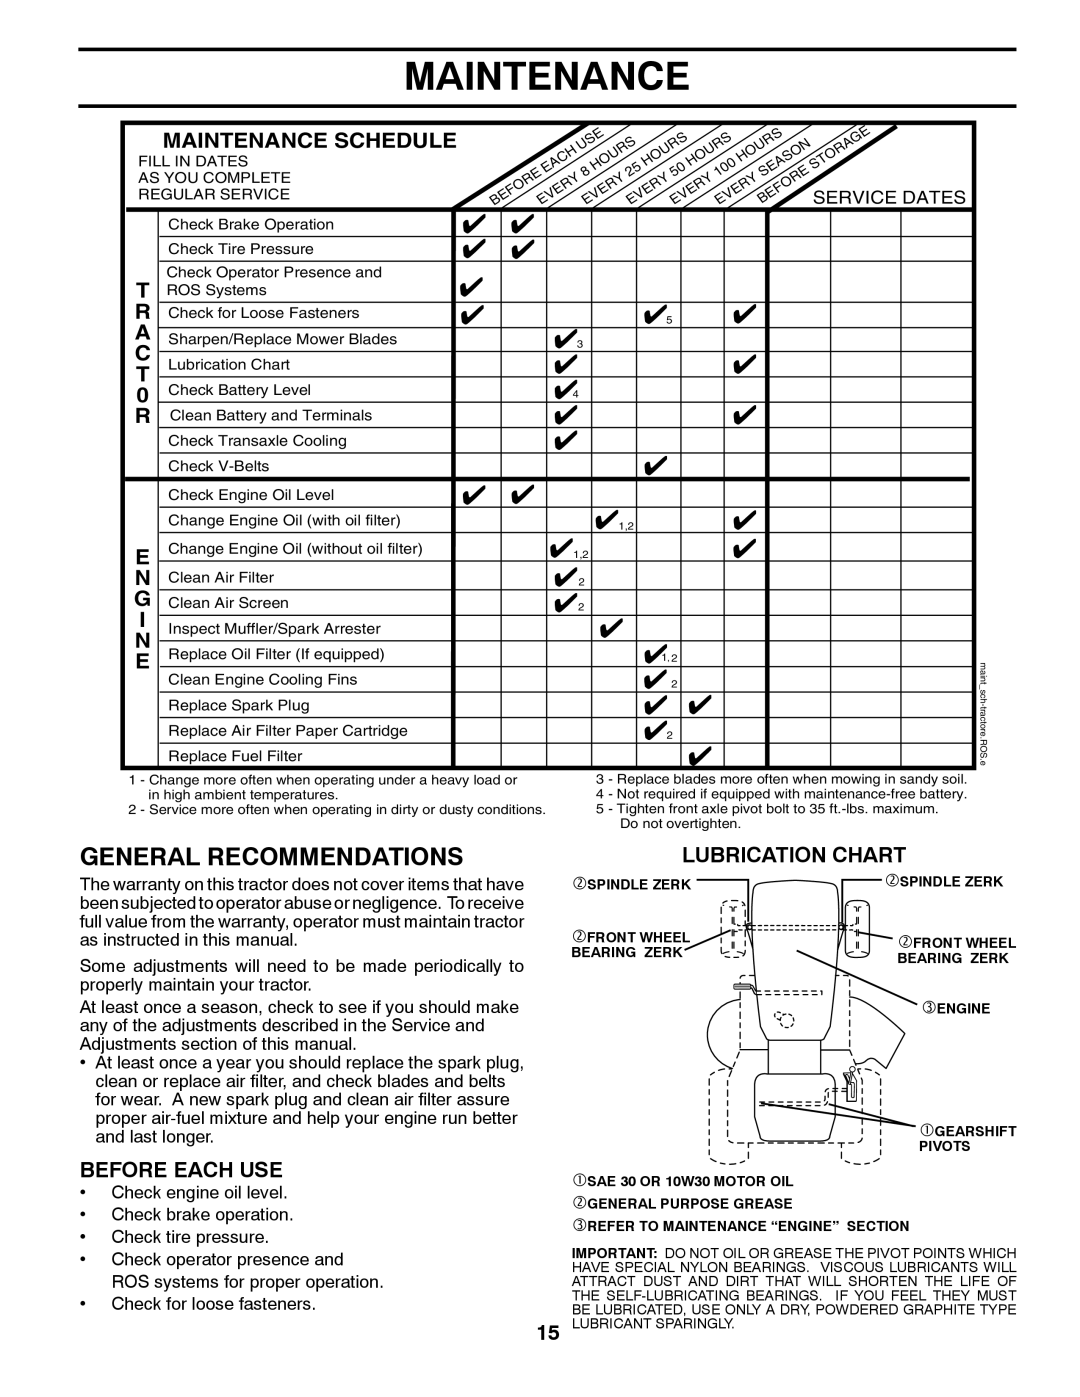 Murray MX17542LT General Recommendations, Maintenance Schedule, Before Each Use, Lubrication Chart, Service Dates 